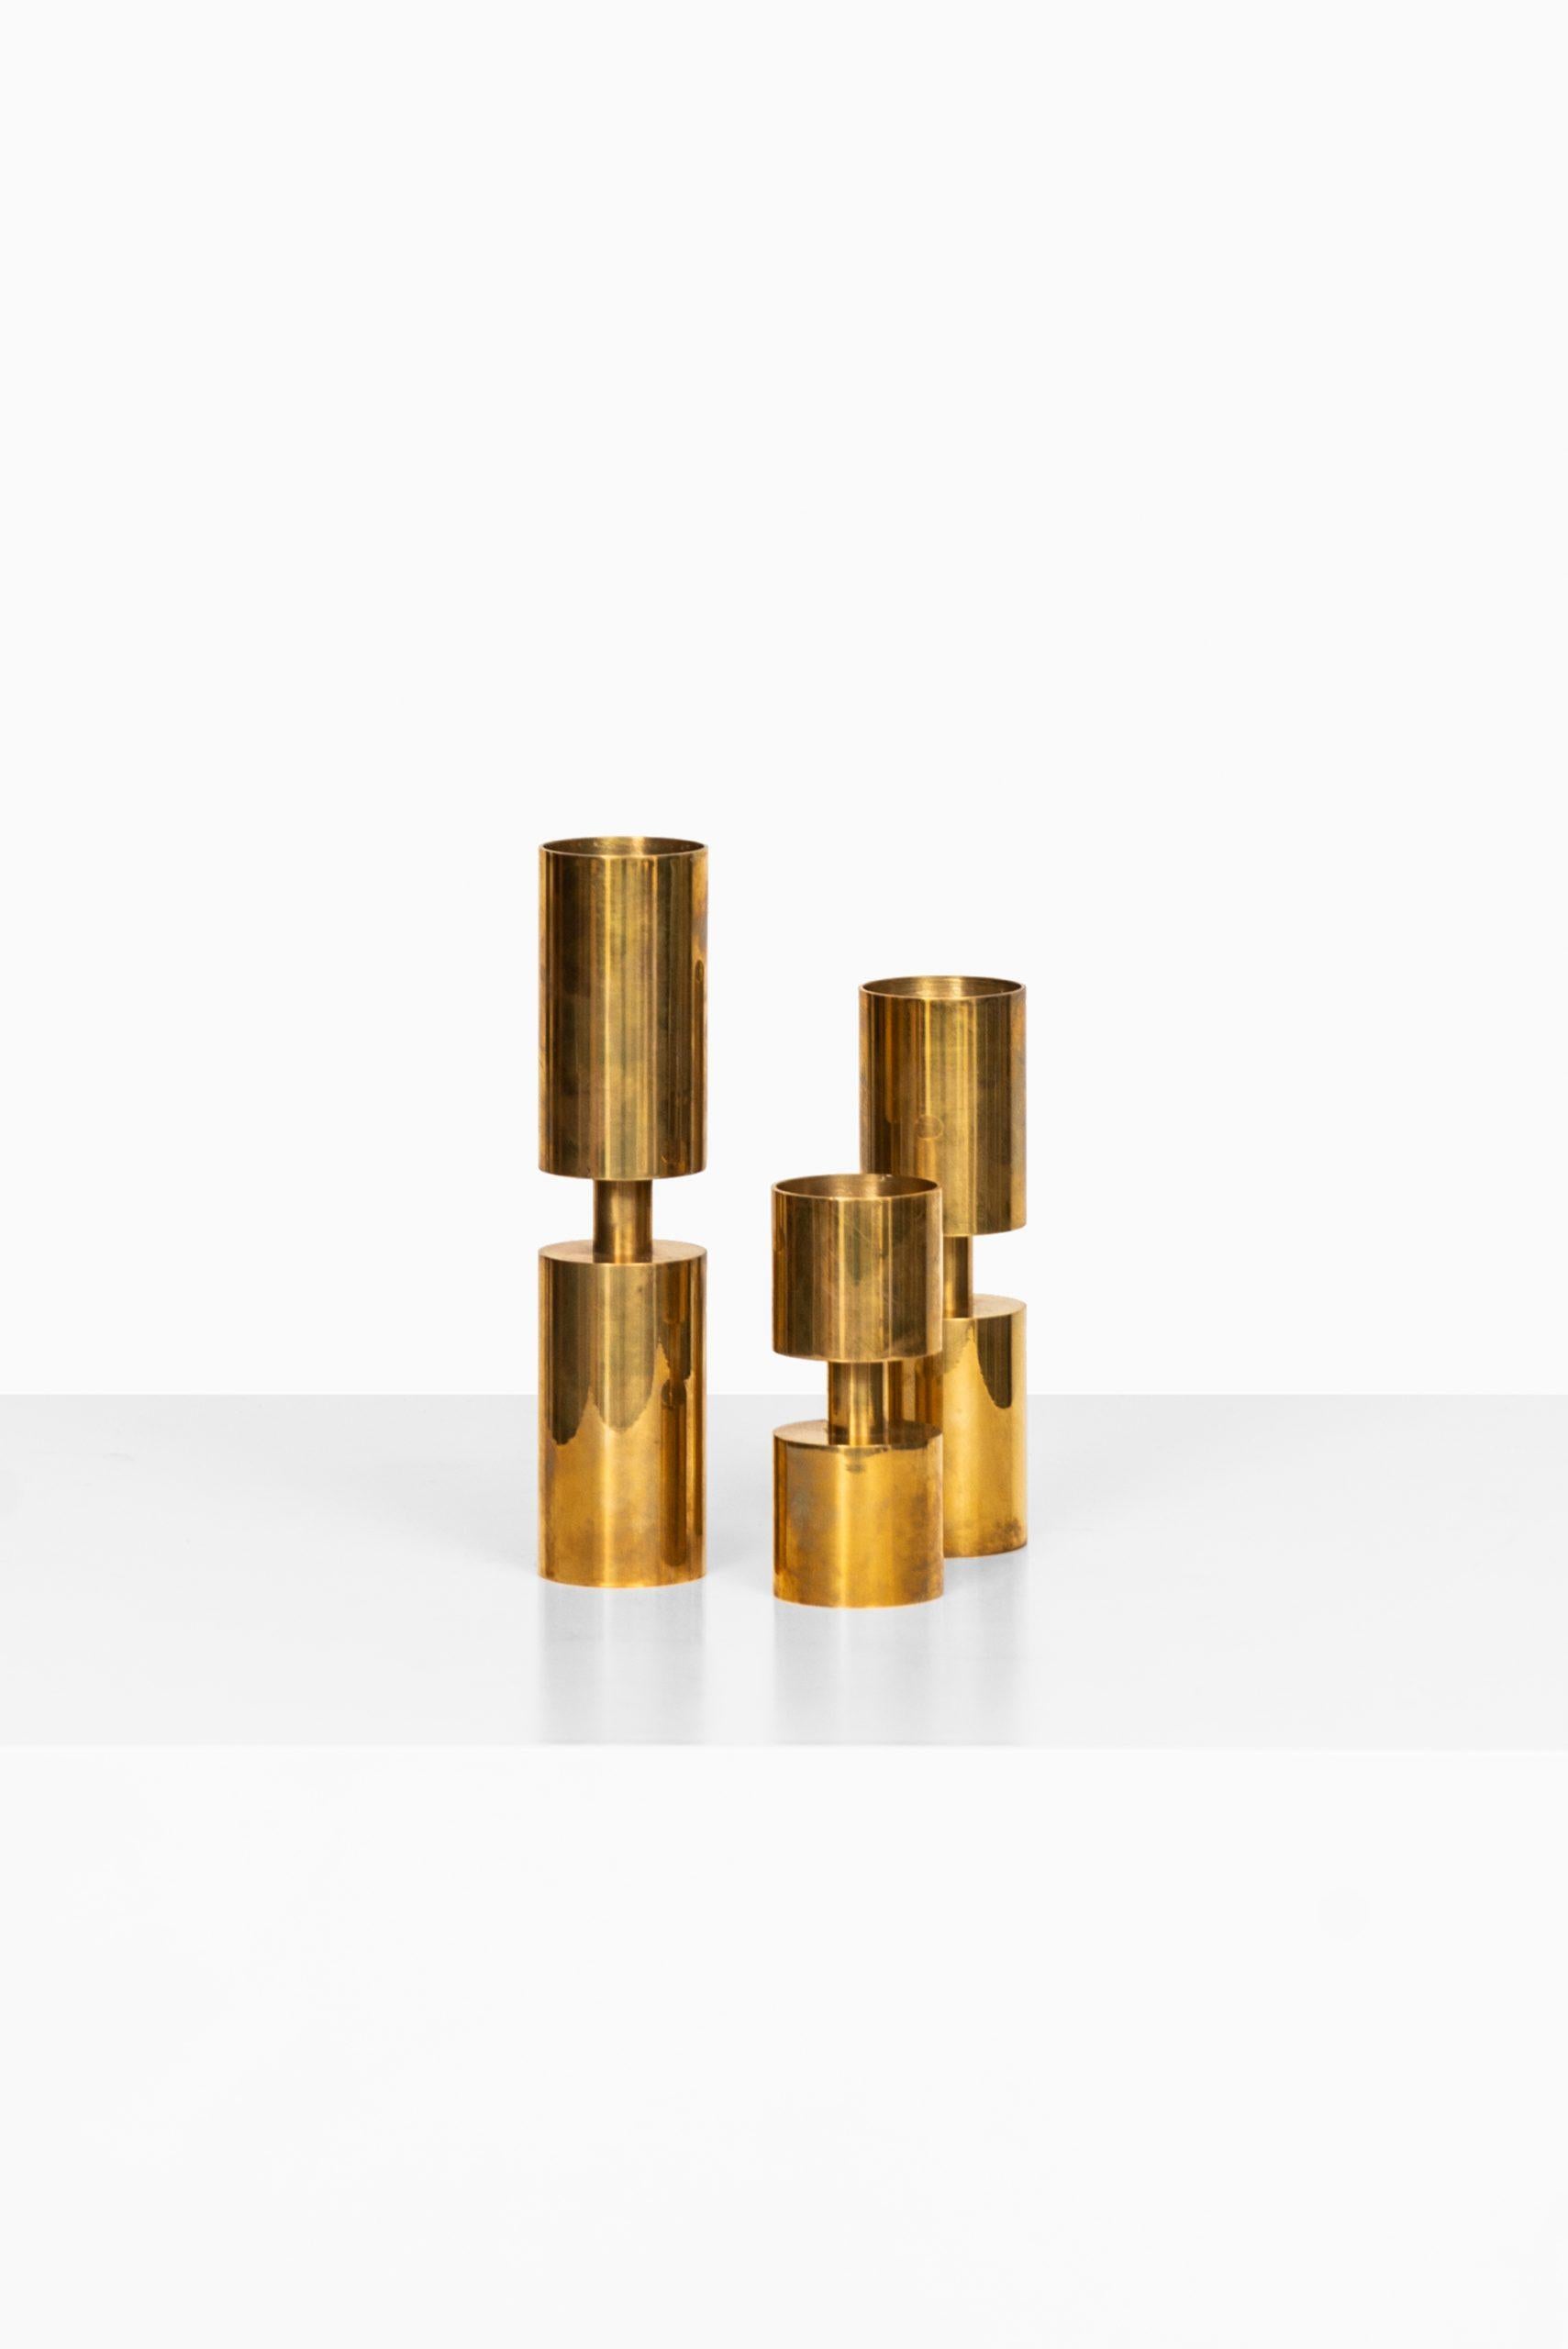 Set of 3 candlesticks designed by Thelma Zoéga. Produced in Sweden.
Dimensions (Ø x H): 4 x 10-18 cm.